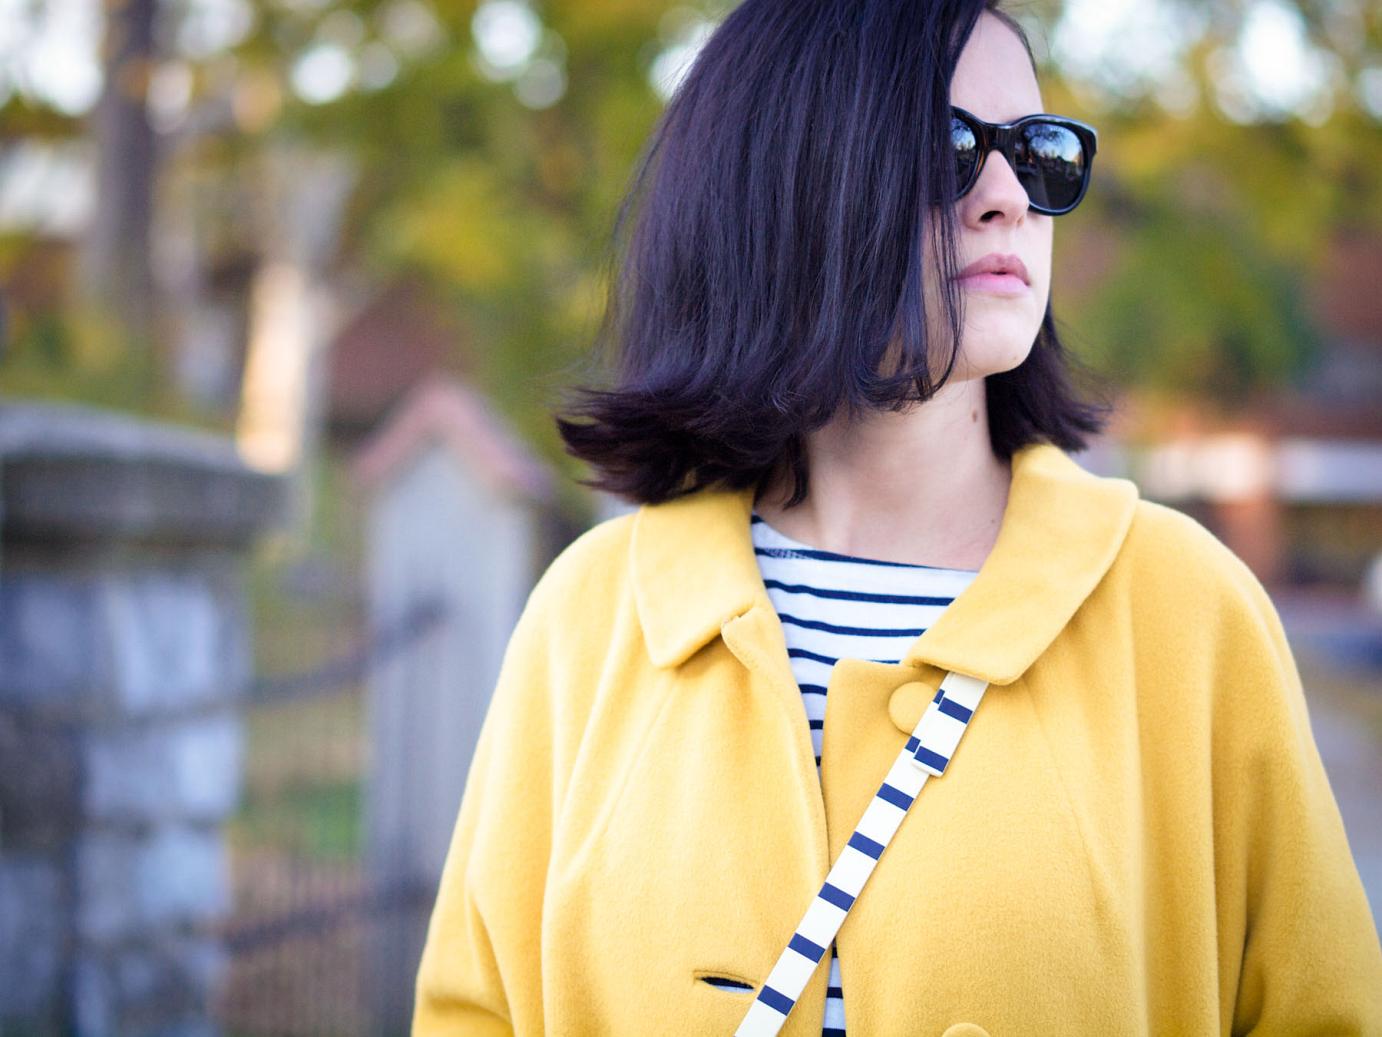 bittersweet colours, fall coats, yellow coat, sophie hulme bag, stripes, boyfriend jeans, yellow shoes, maternity style, 22 weeks, bump style, fall street style, street style,